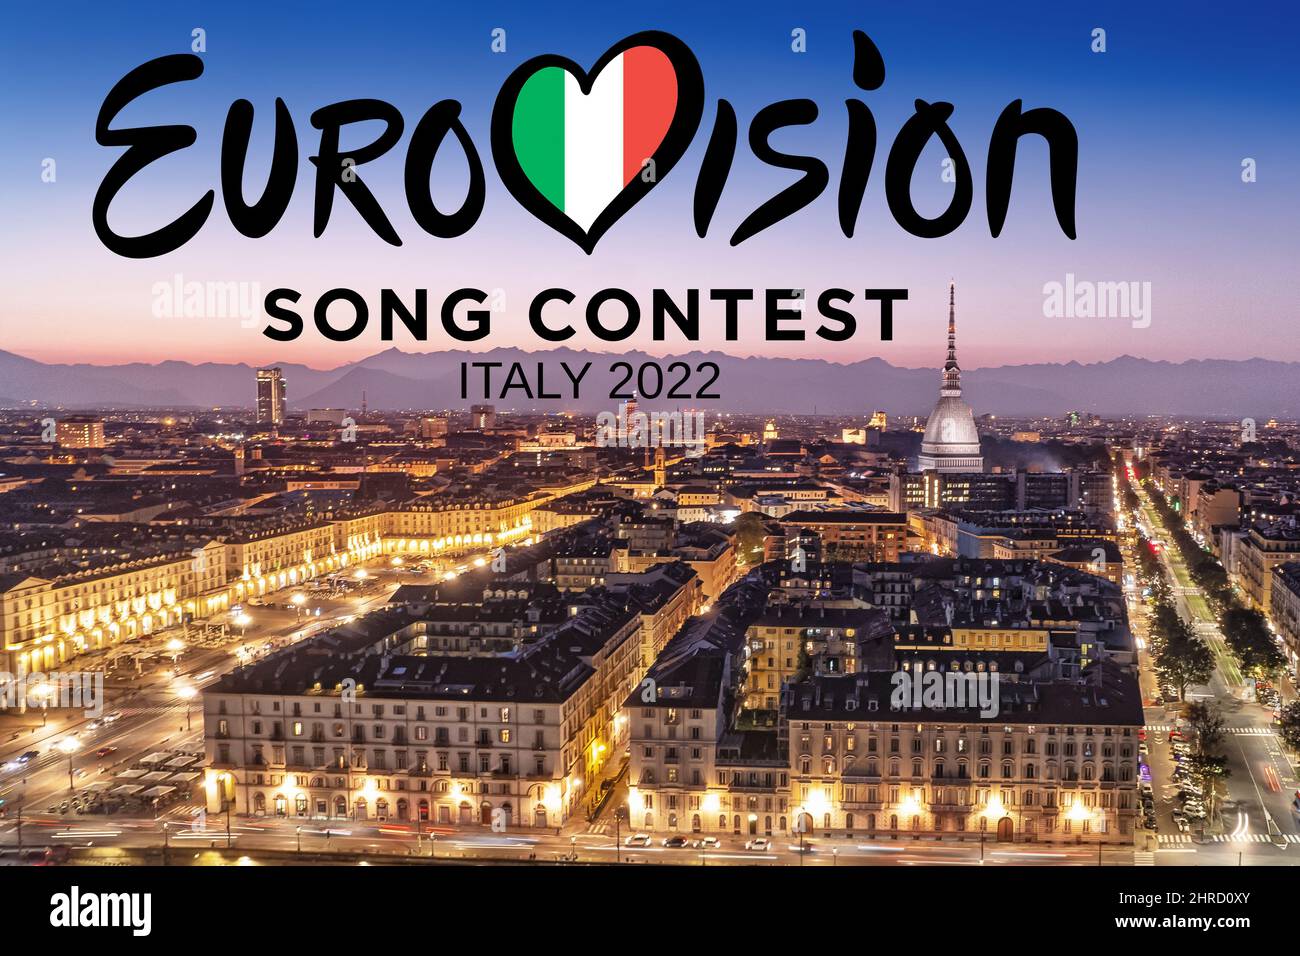 Eurovision Song Contest logo on on Turin's cityscape at night. The 66th edition will be held in Turin in May 2022. Turin, Italy - february 2022 Stock Photo